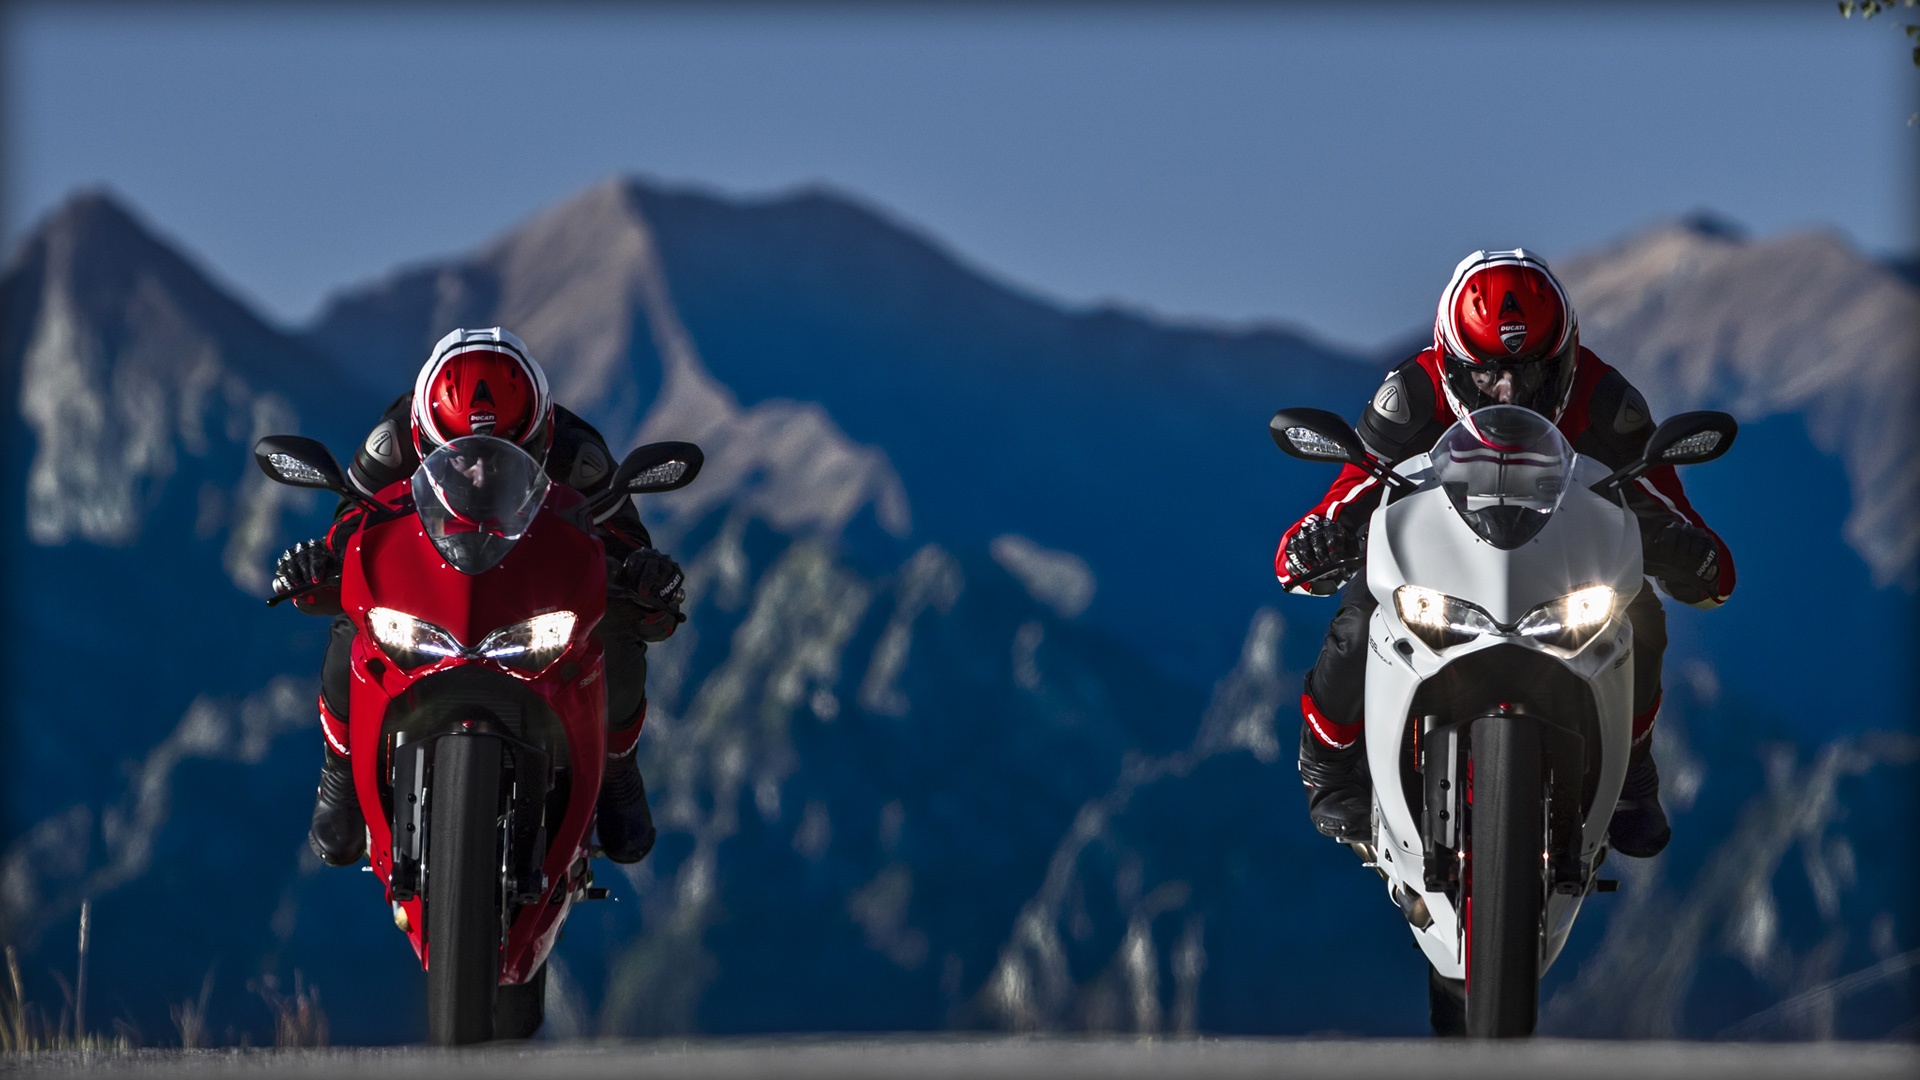 SBK-959-Panigale_2016_Amb-18_1920x1080.mediagallery_output_image_[1920×1080]